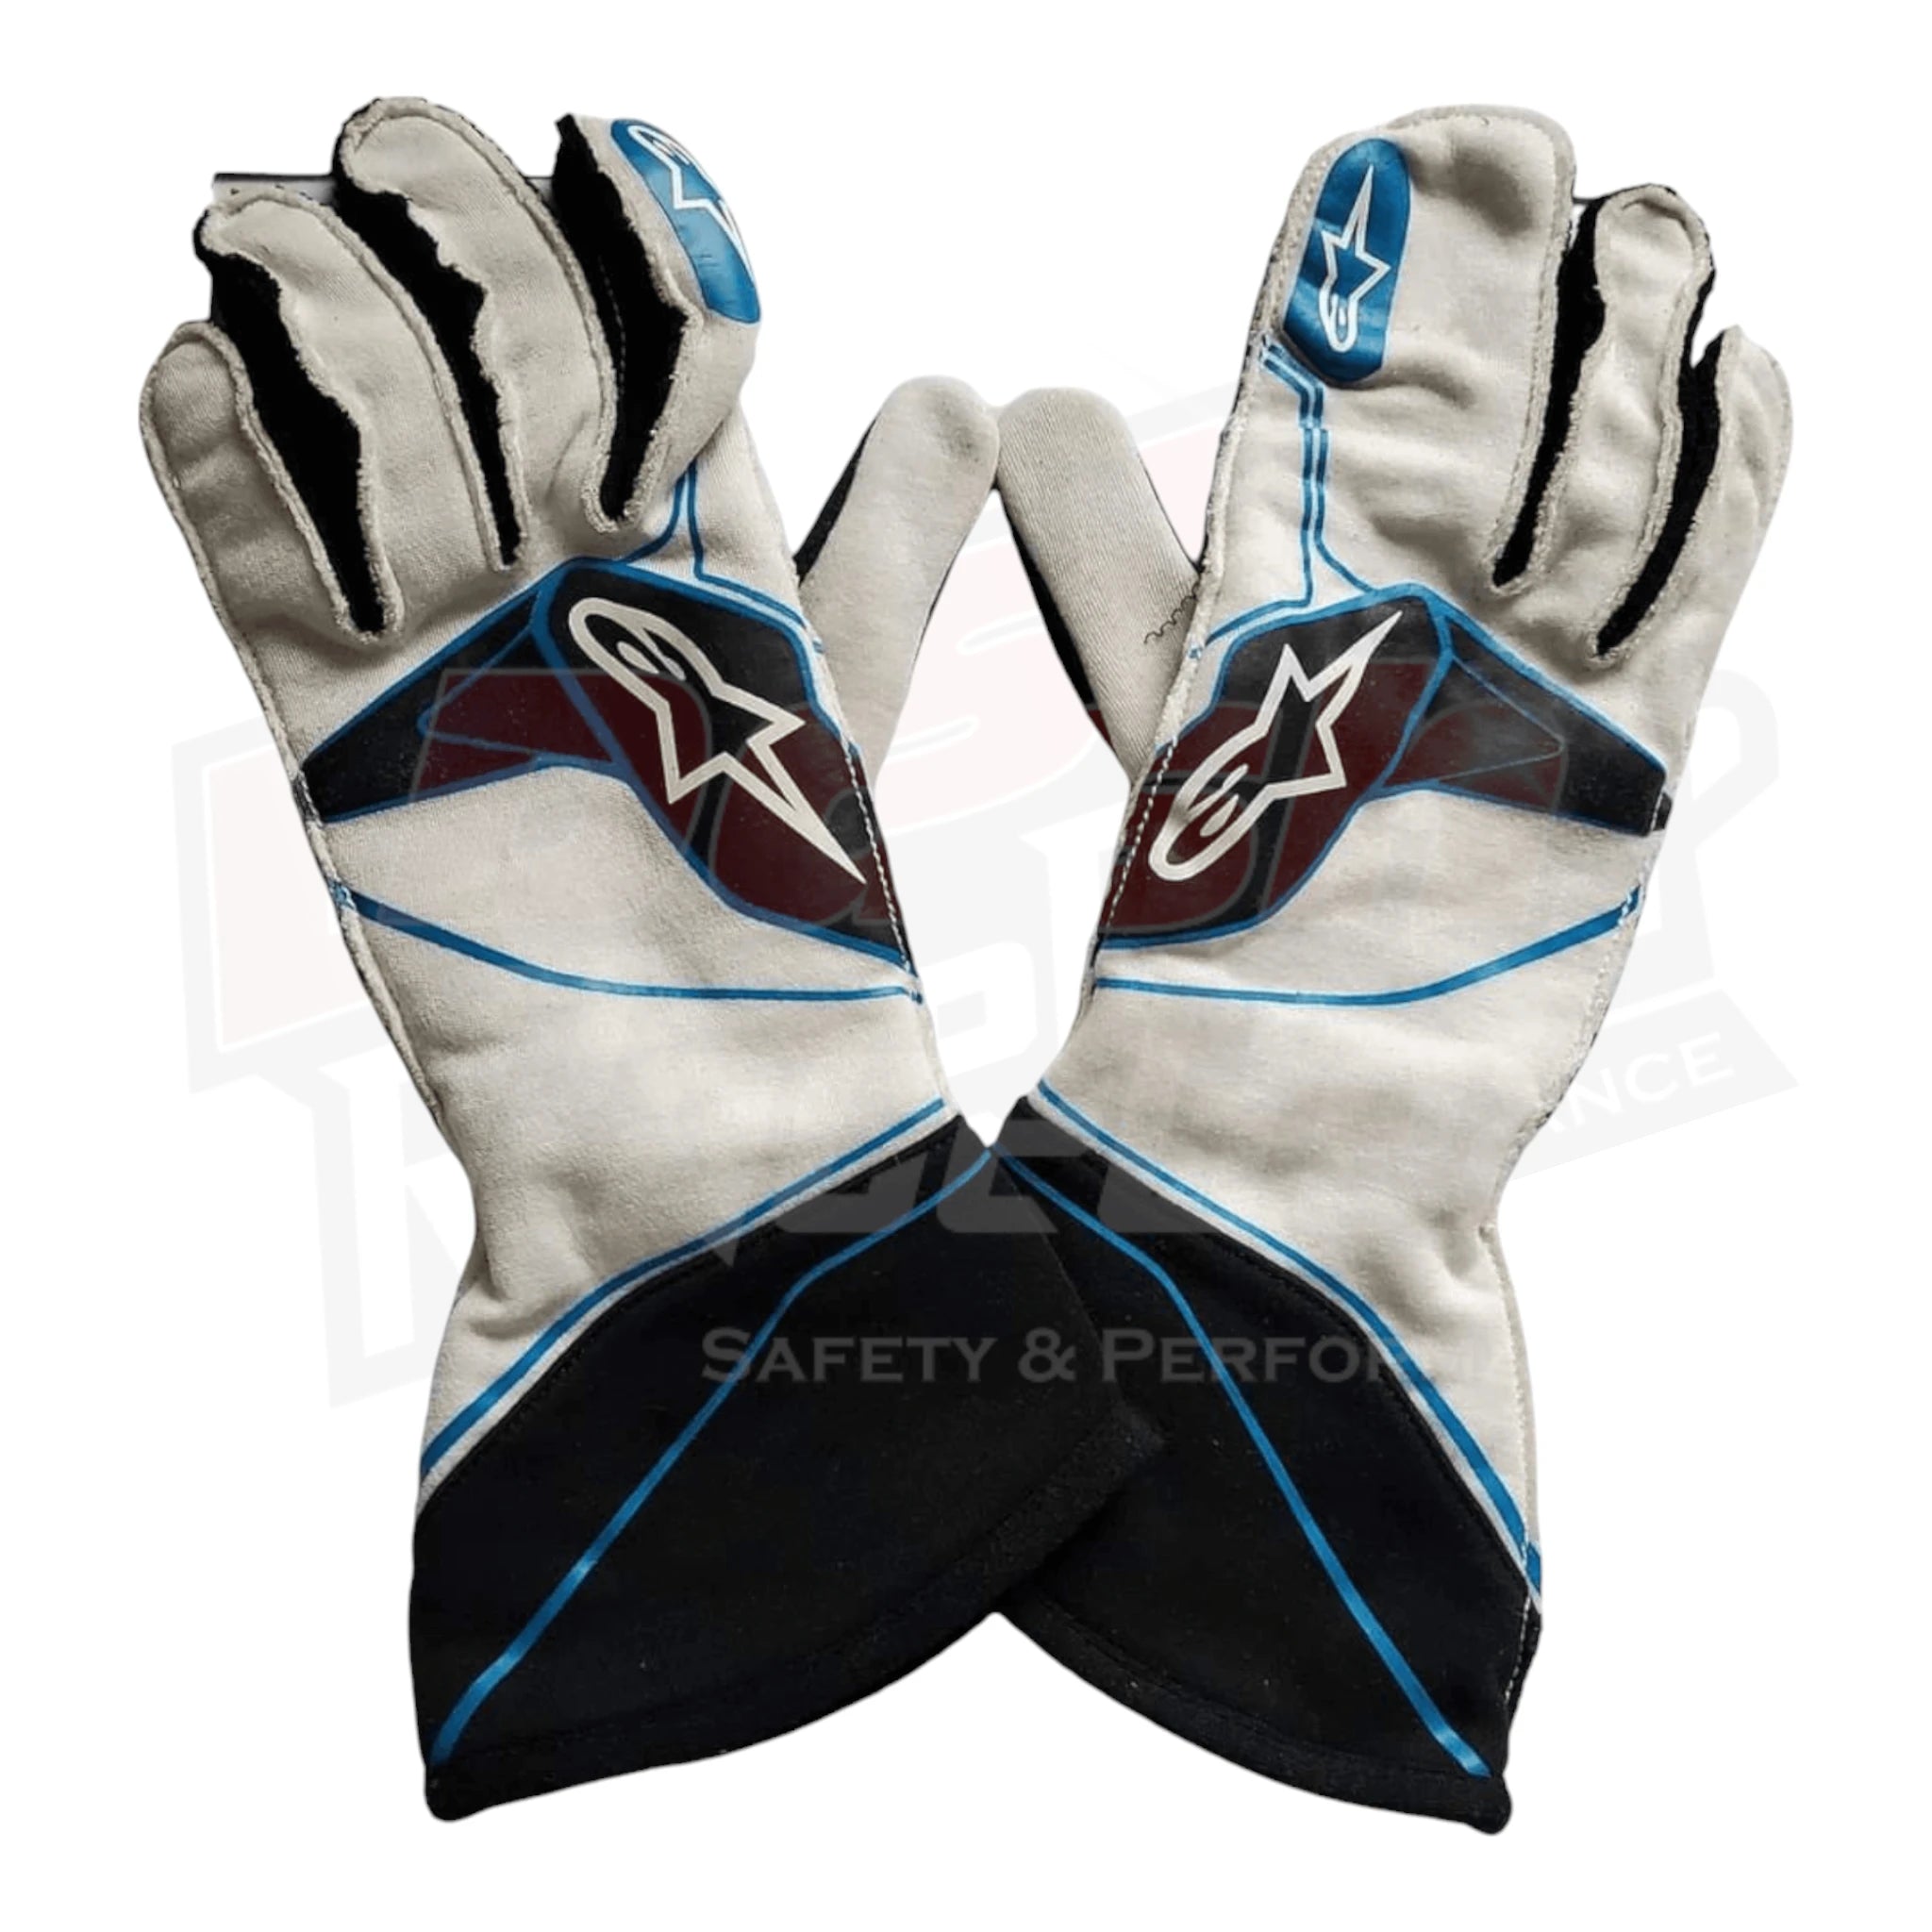 2019 George Russell Williams Racing F1 Race Gloves